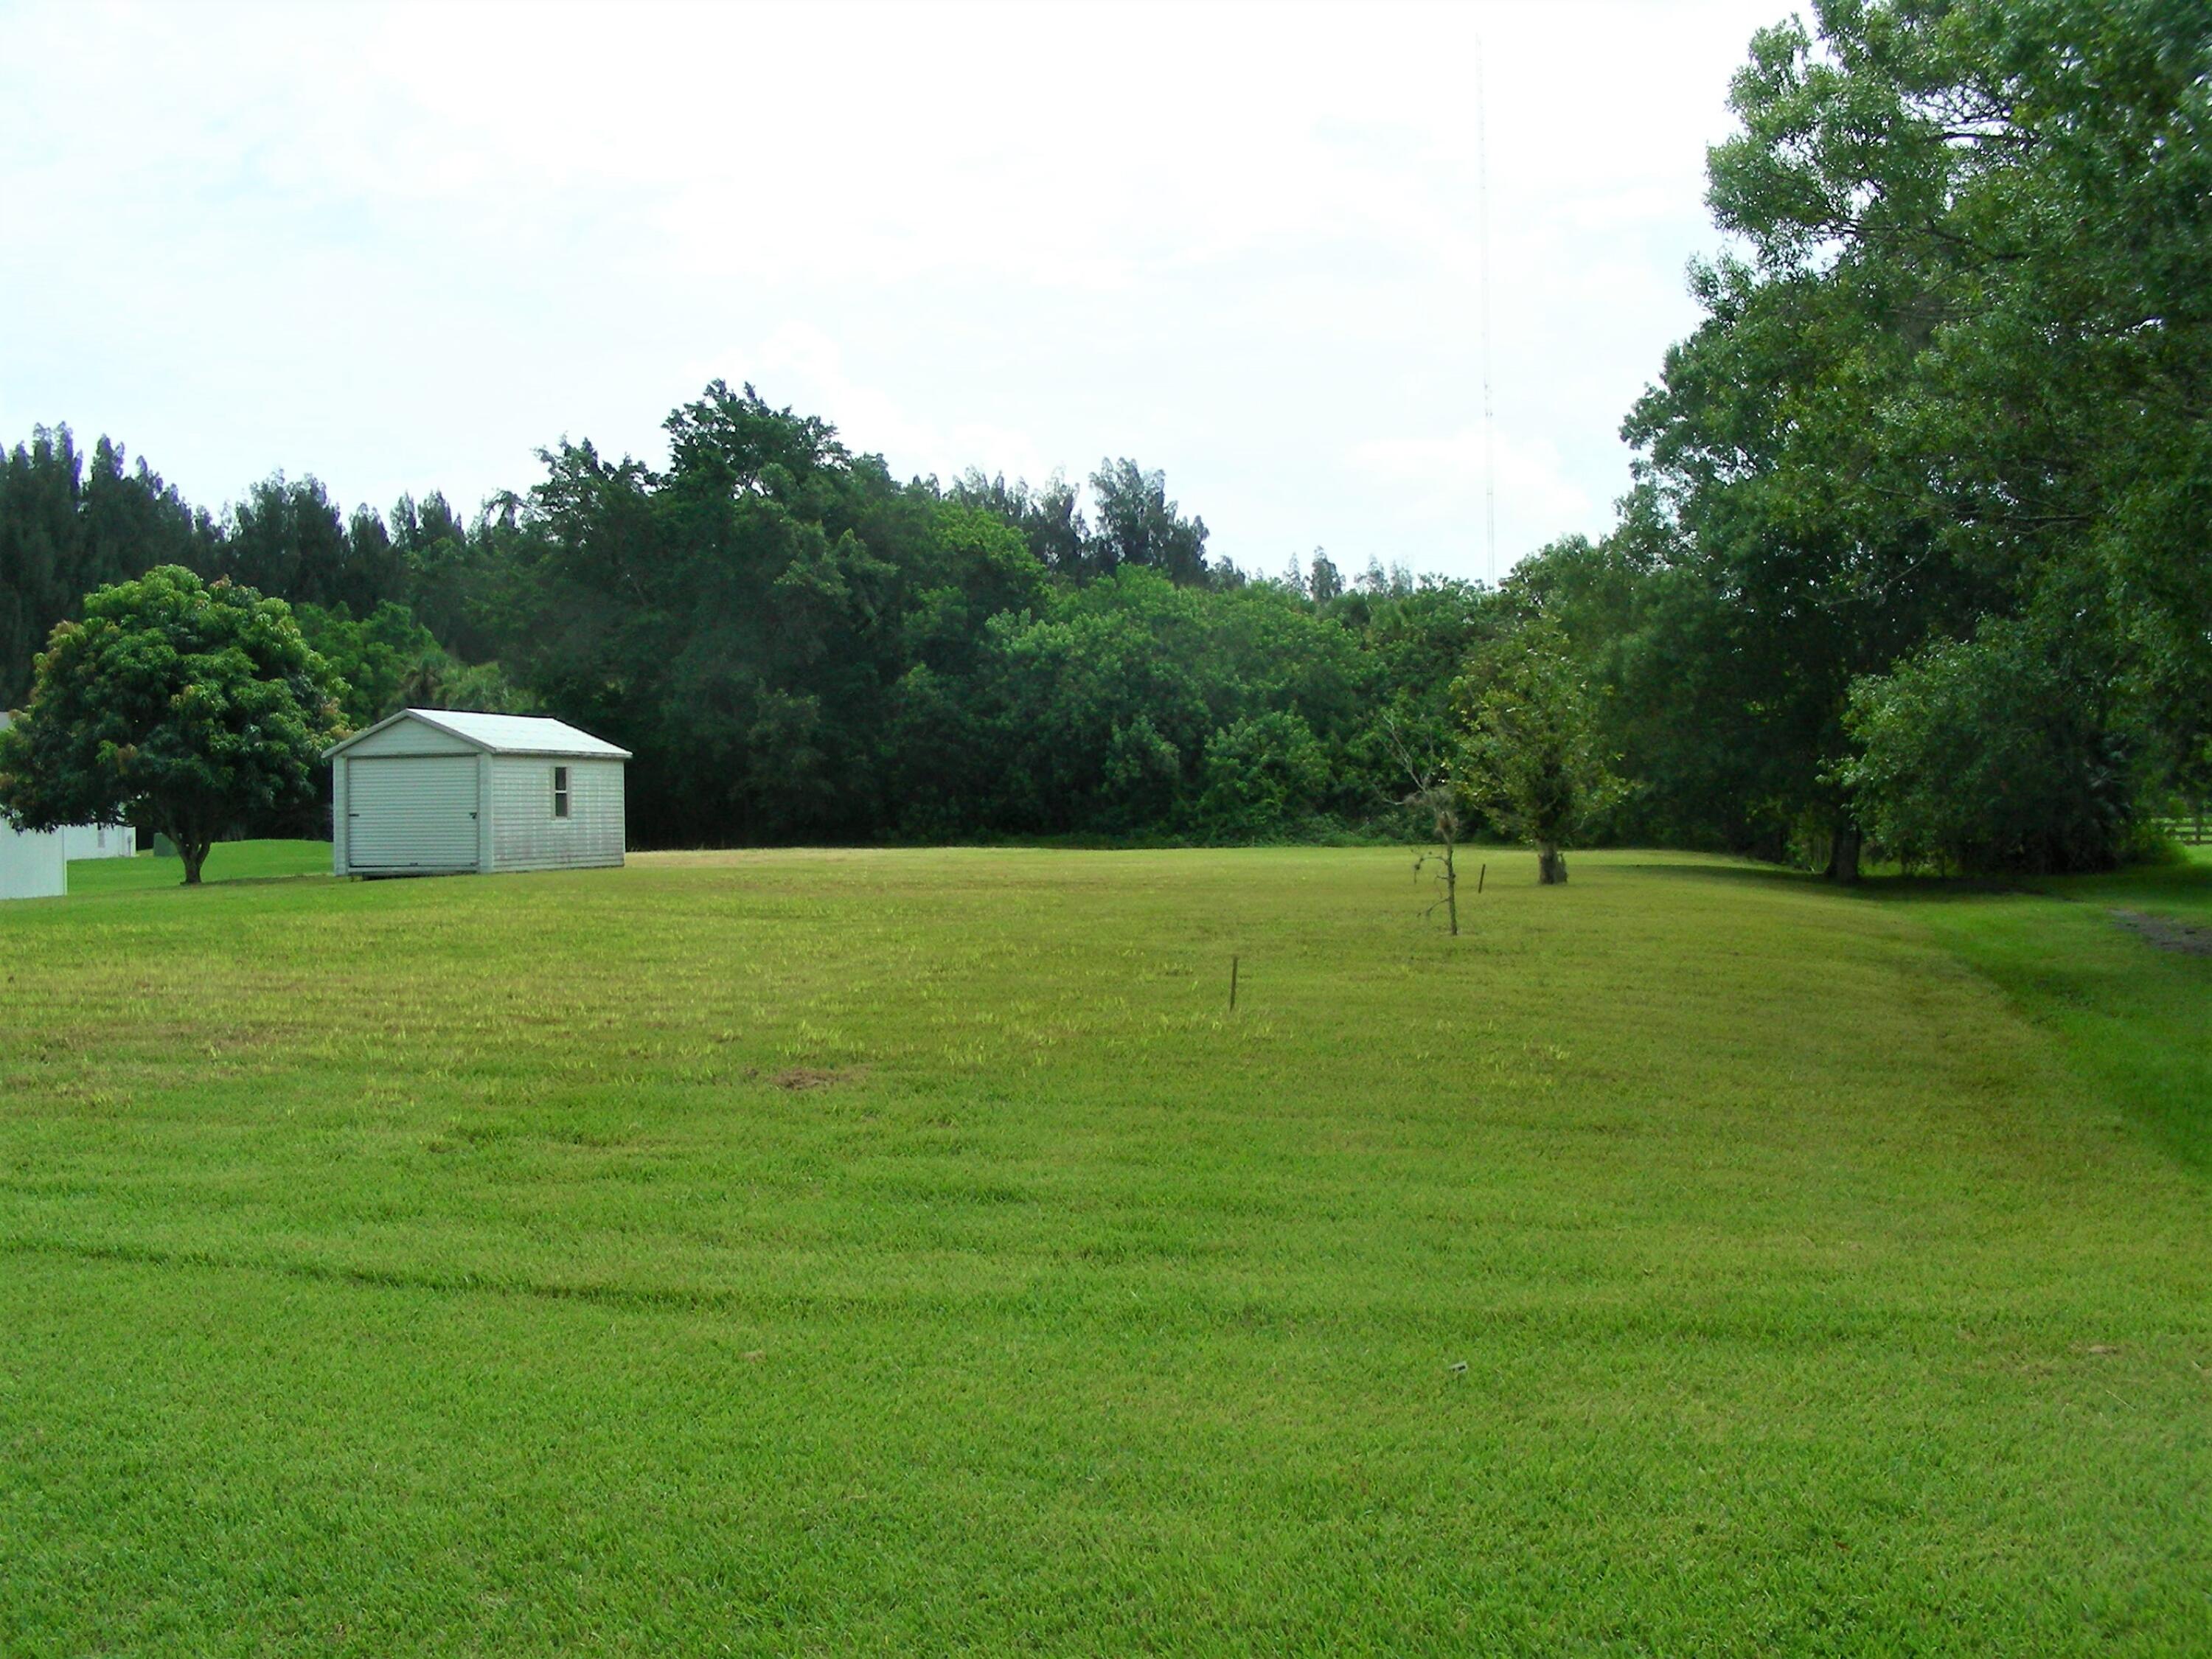 a view of a field with grass and trees